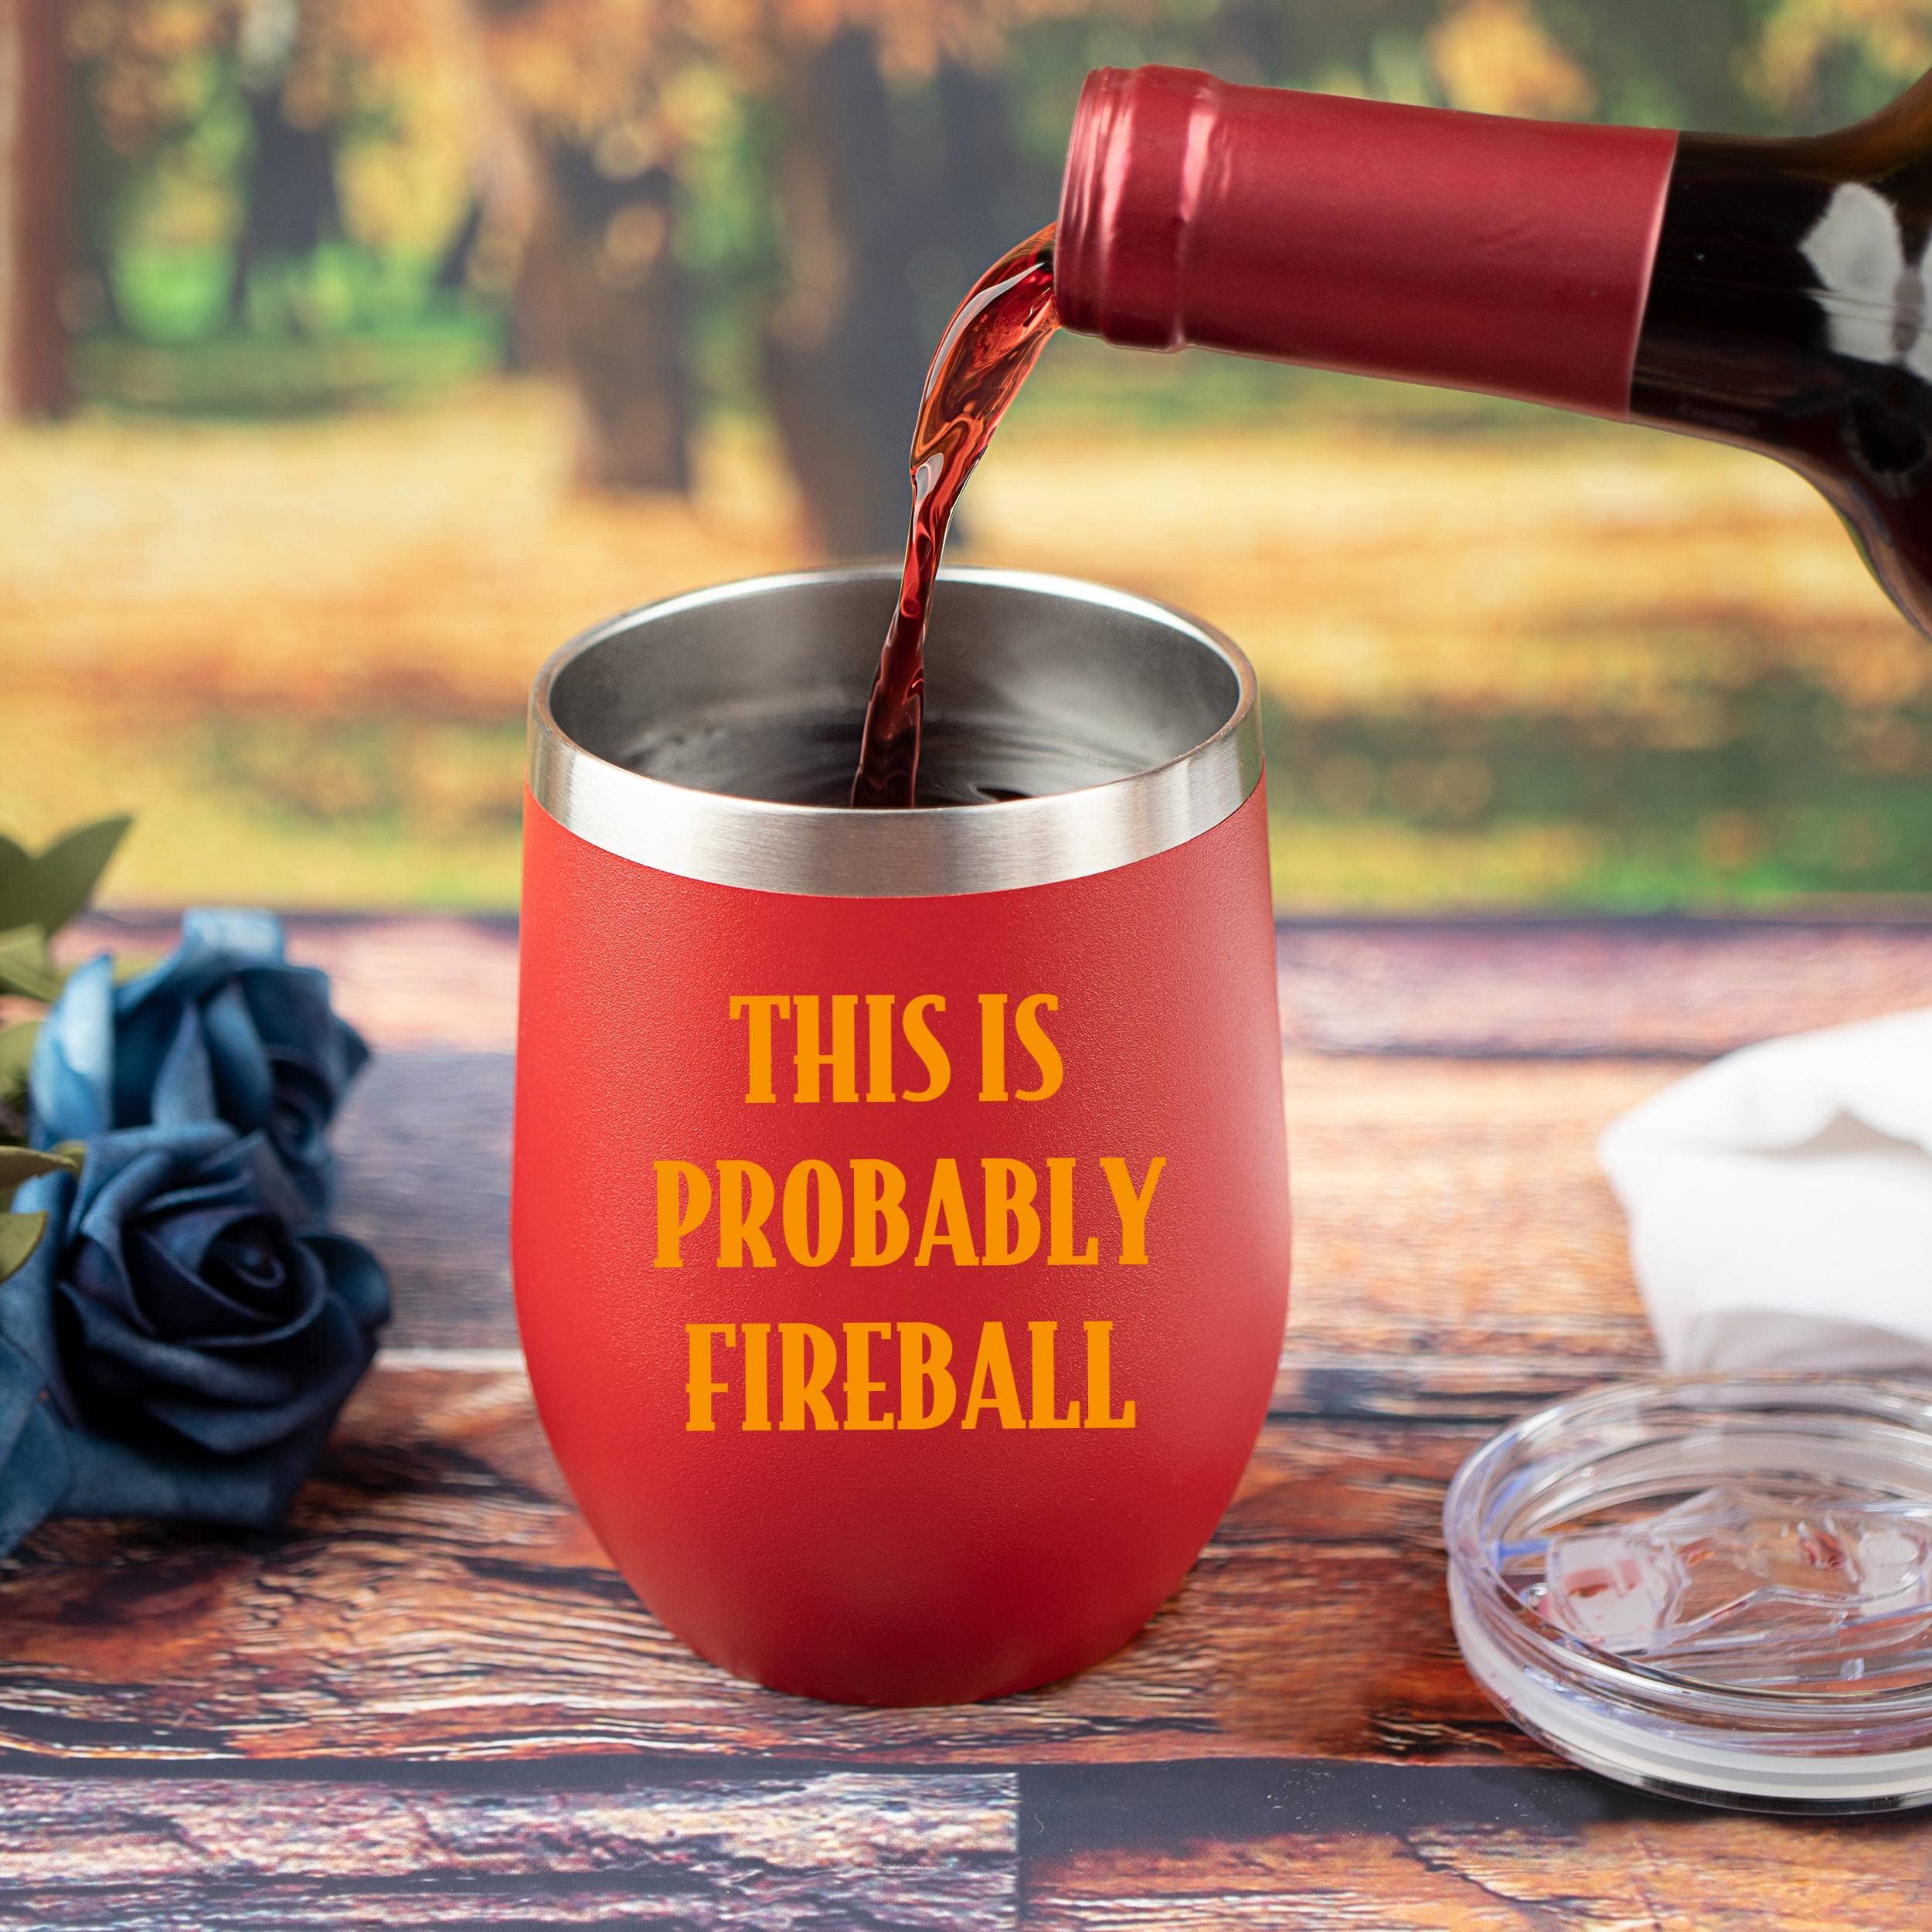 JENVIO Fireball Whiskey Gifts | This is Probably Fireball | Cinnamon Red Coffee/Liquor Stainless Steel Tumbler Mug with Lid and 2 Straws for Men or Women Wine Glass Valentine's Day (12 Ounce)